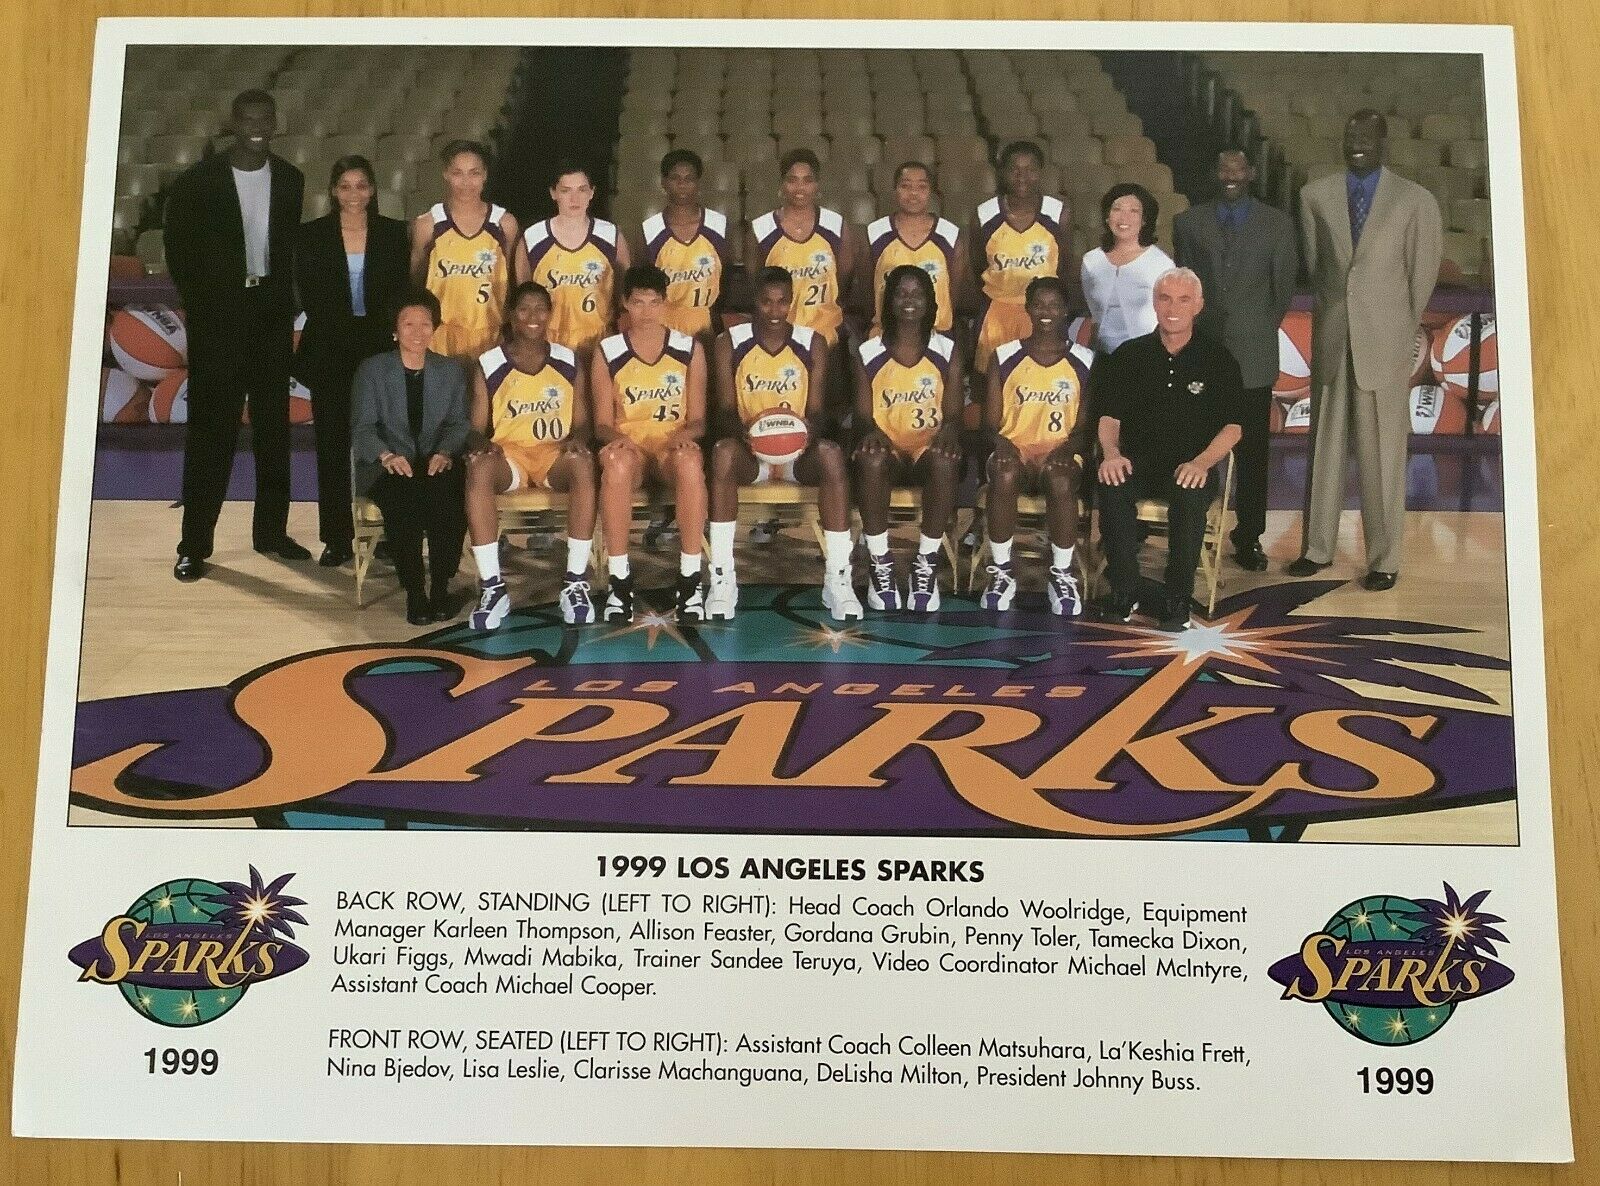 Exc Orig 1999 Los Angeles Sparks Color Promotional Team Photo 9x11 Sga Nm